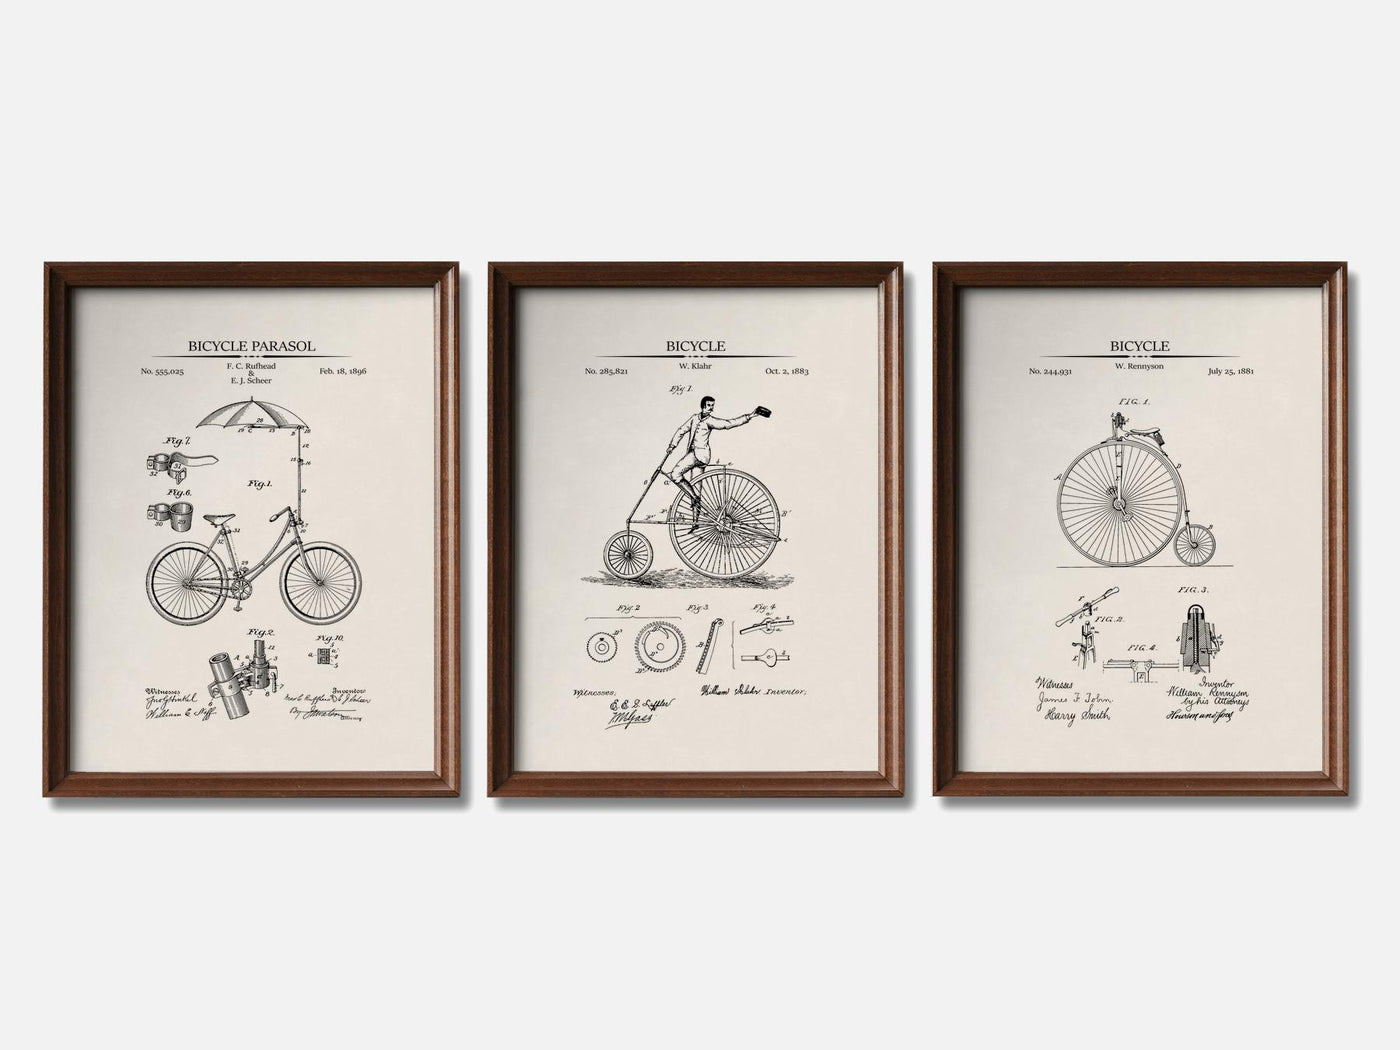 Vintage Bicycle Patent Print Set of 3 mockup - A_t10125-V1-PC_F+WA-SS_3-PS_11x14-C_ivo variant